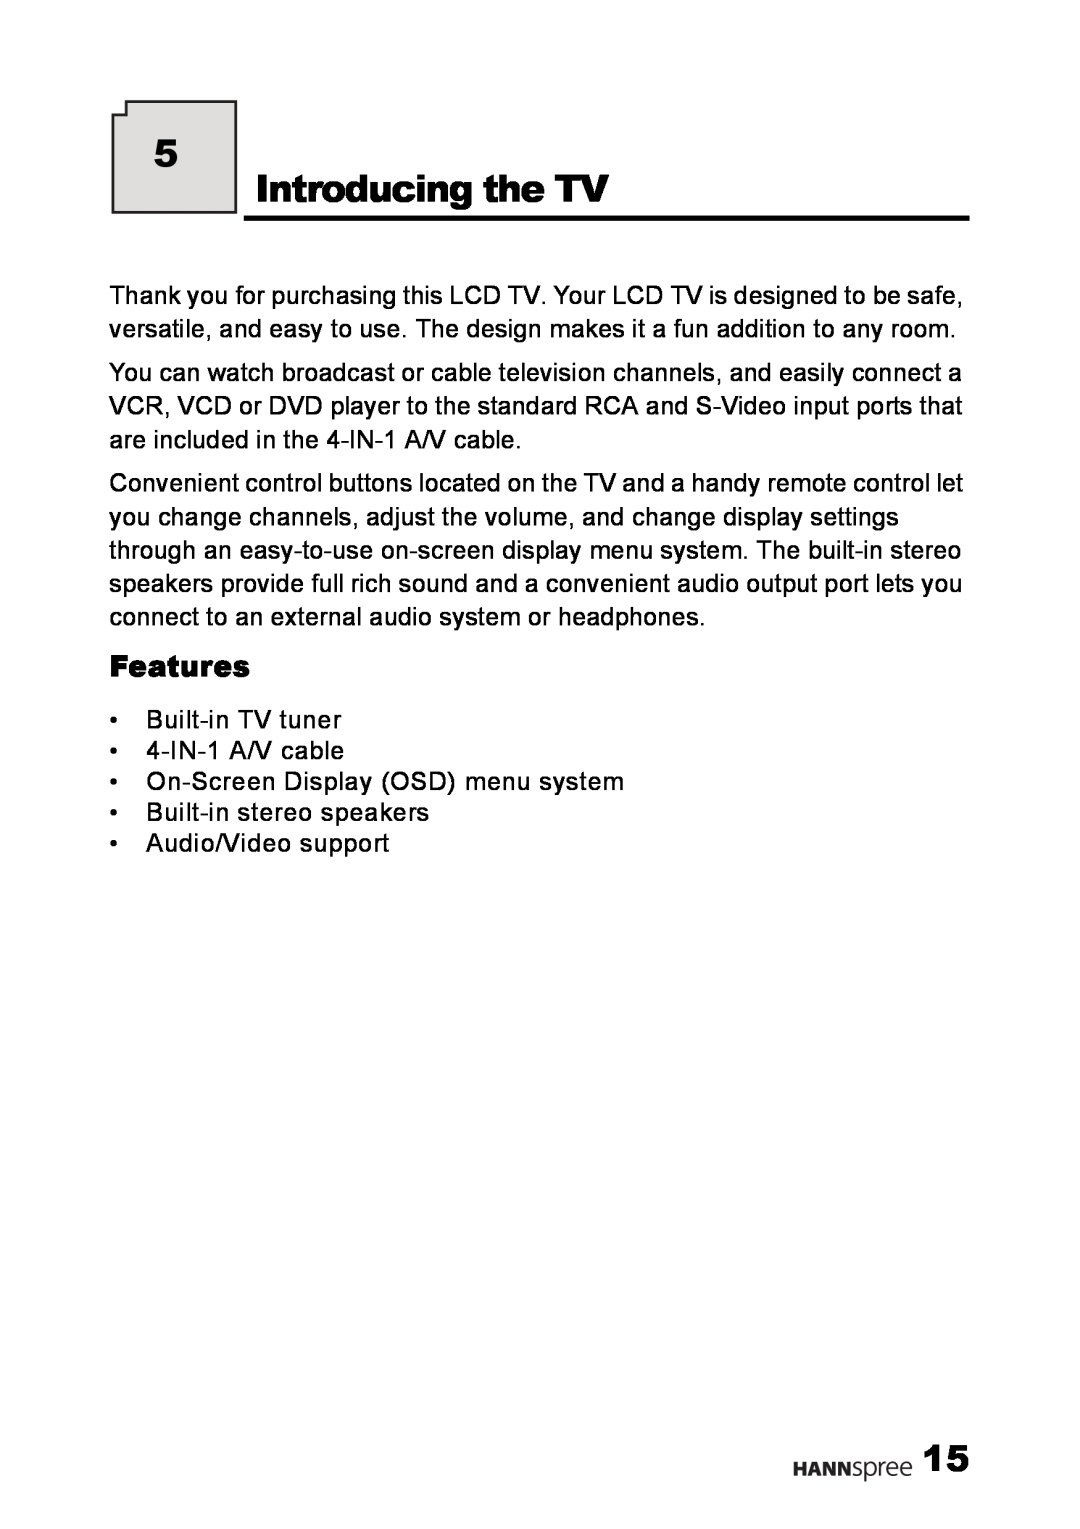 HANNspree LT09-10U1-000 user manual Introducing the TV, Features 